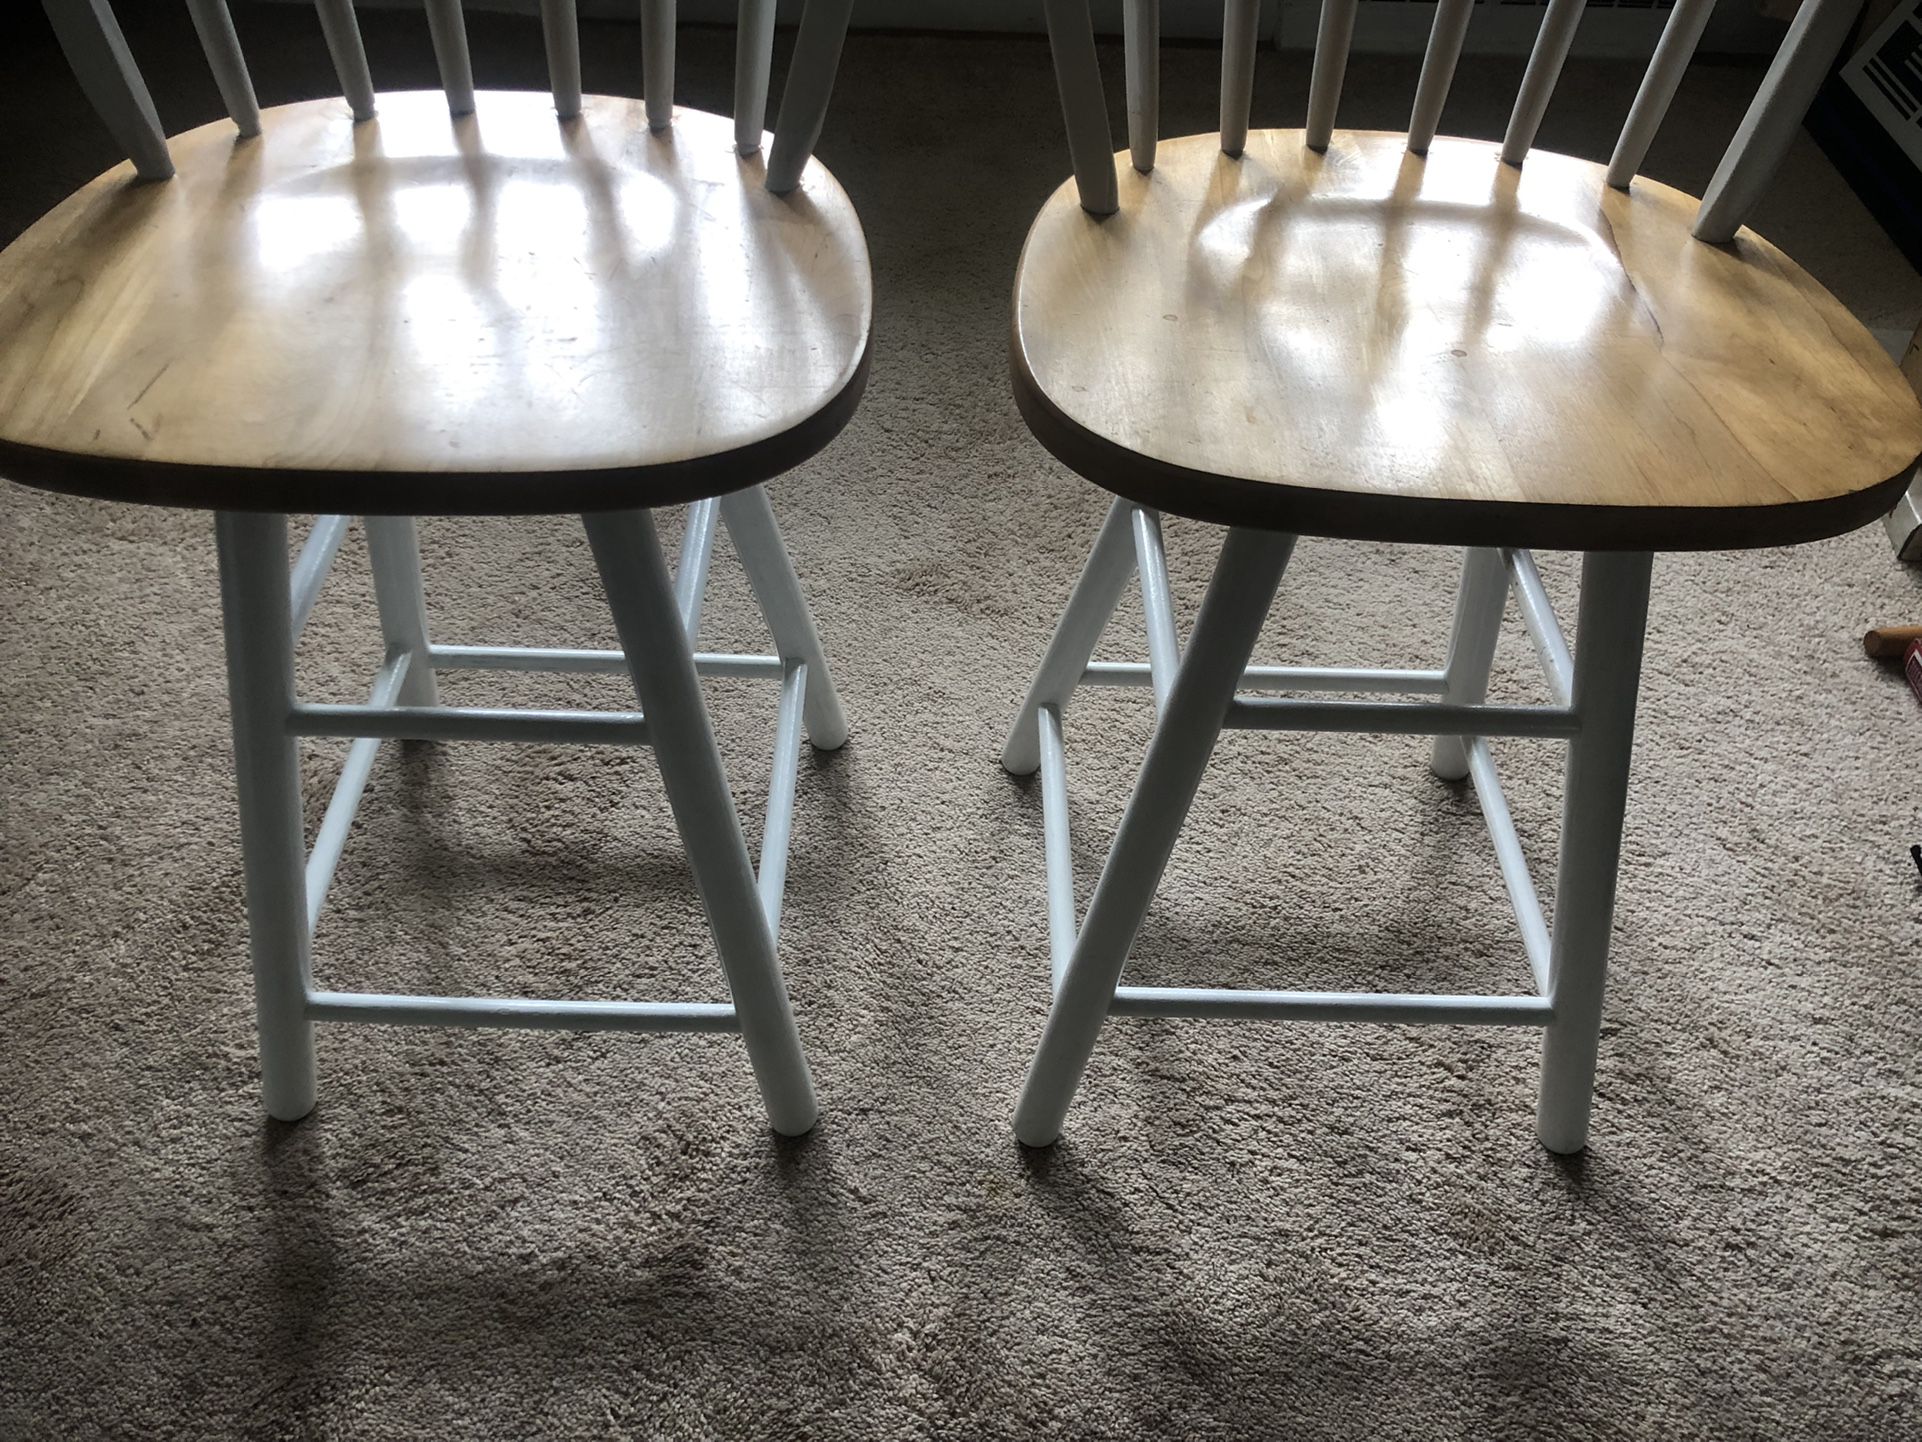 High Back Wooden Chairs, Barstools